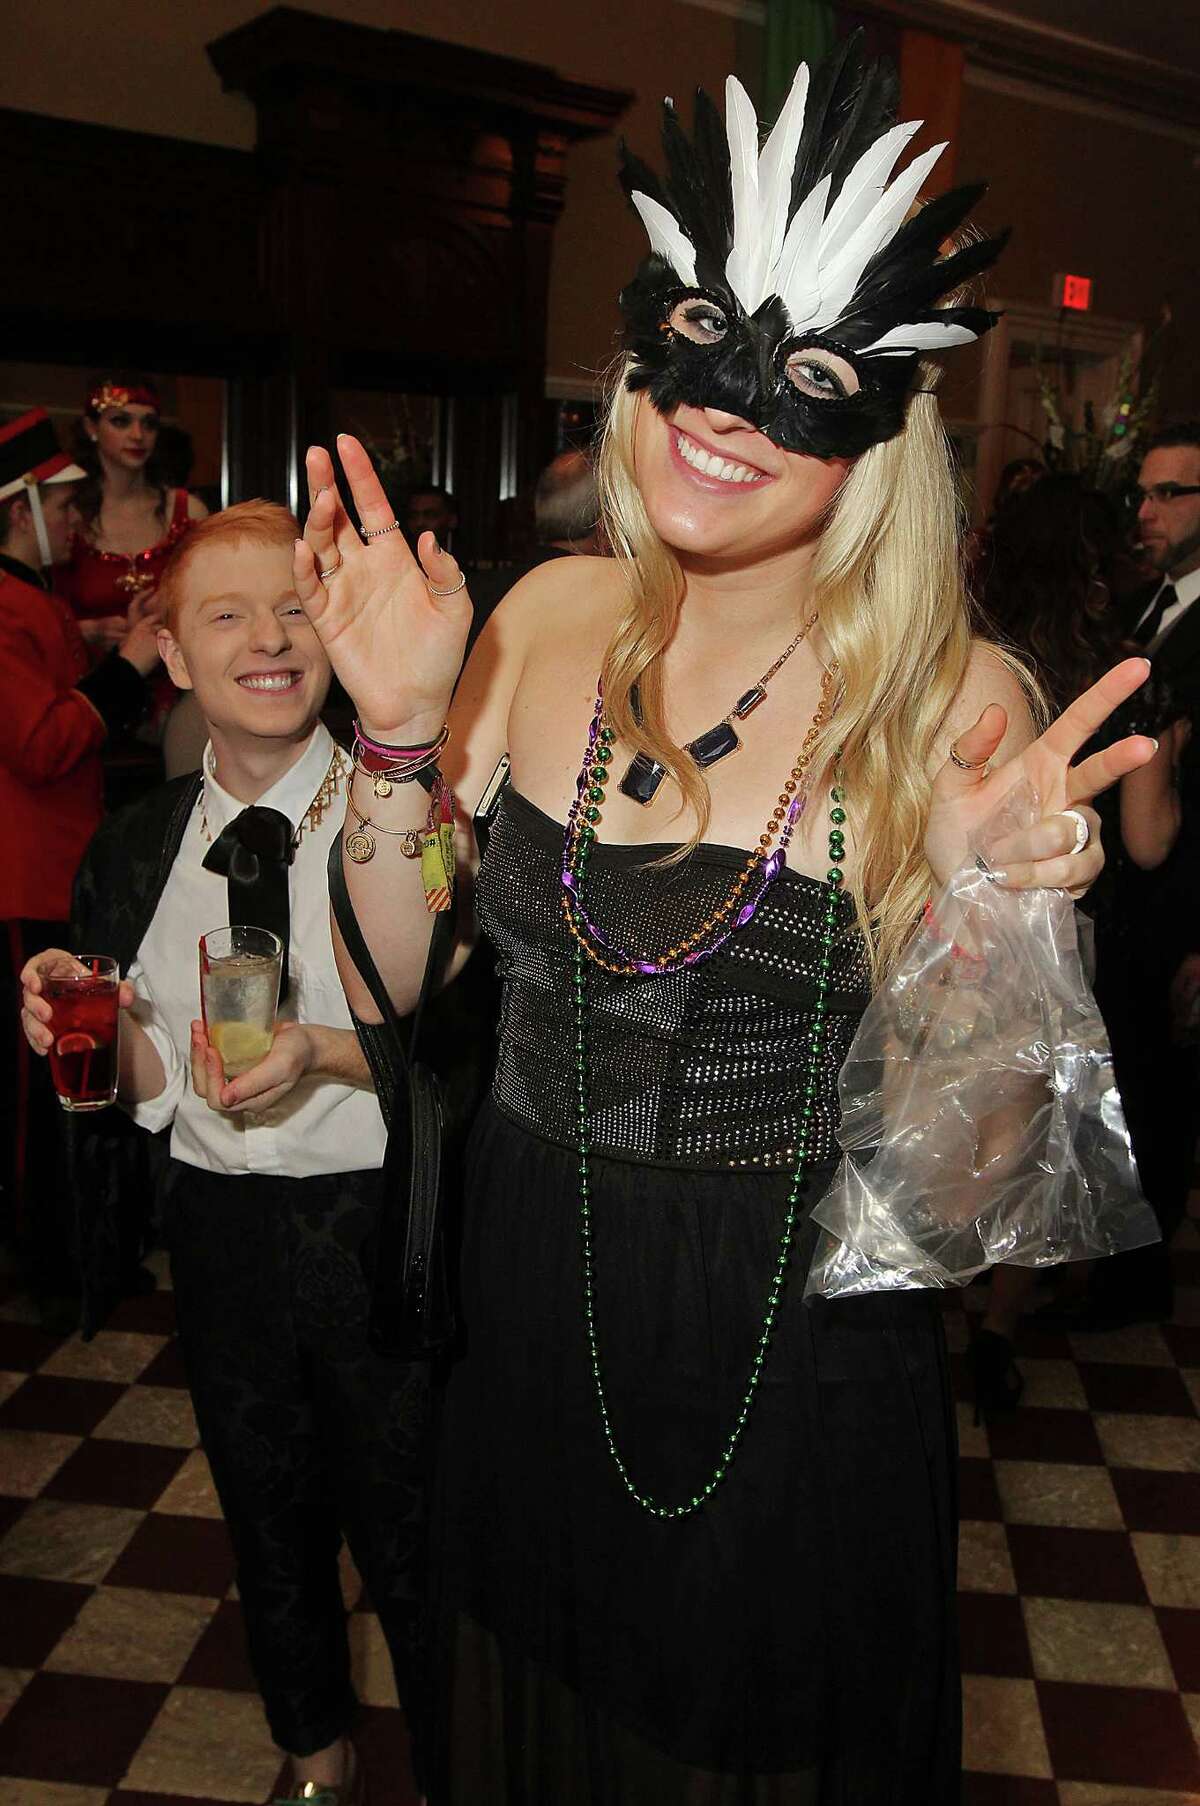 "New Years Eve Masquerade Party" Where: The Sugar Refinery Address: 2248 Texas DriveDate and time: December 31 at 7 p.m. to January 1 at 2 a.m.Event info: Your ticket includes a champagne toast at midnight, party favors and music by a DJ. Tickets: $25 per person for general admission